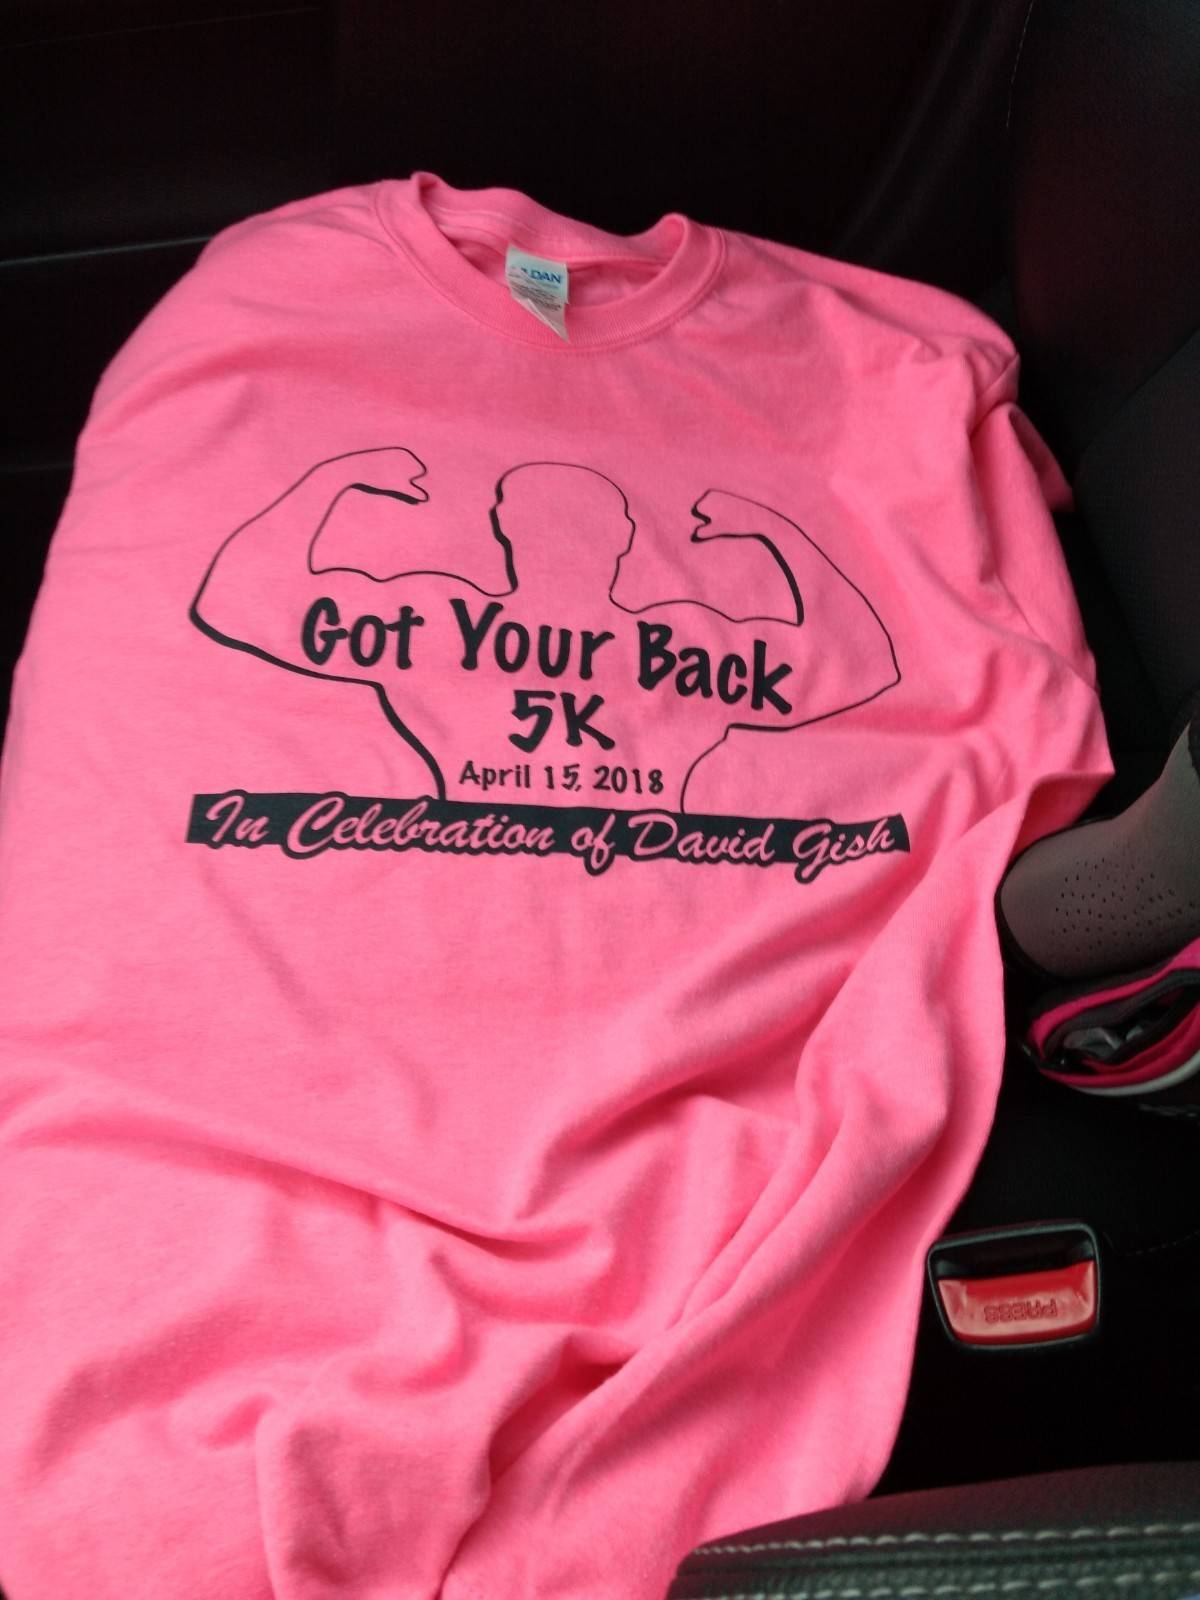 an image of the hot pink event t-shirt which has the words "got your back 5k" on it